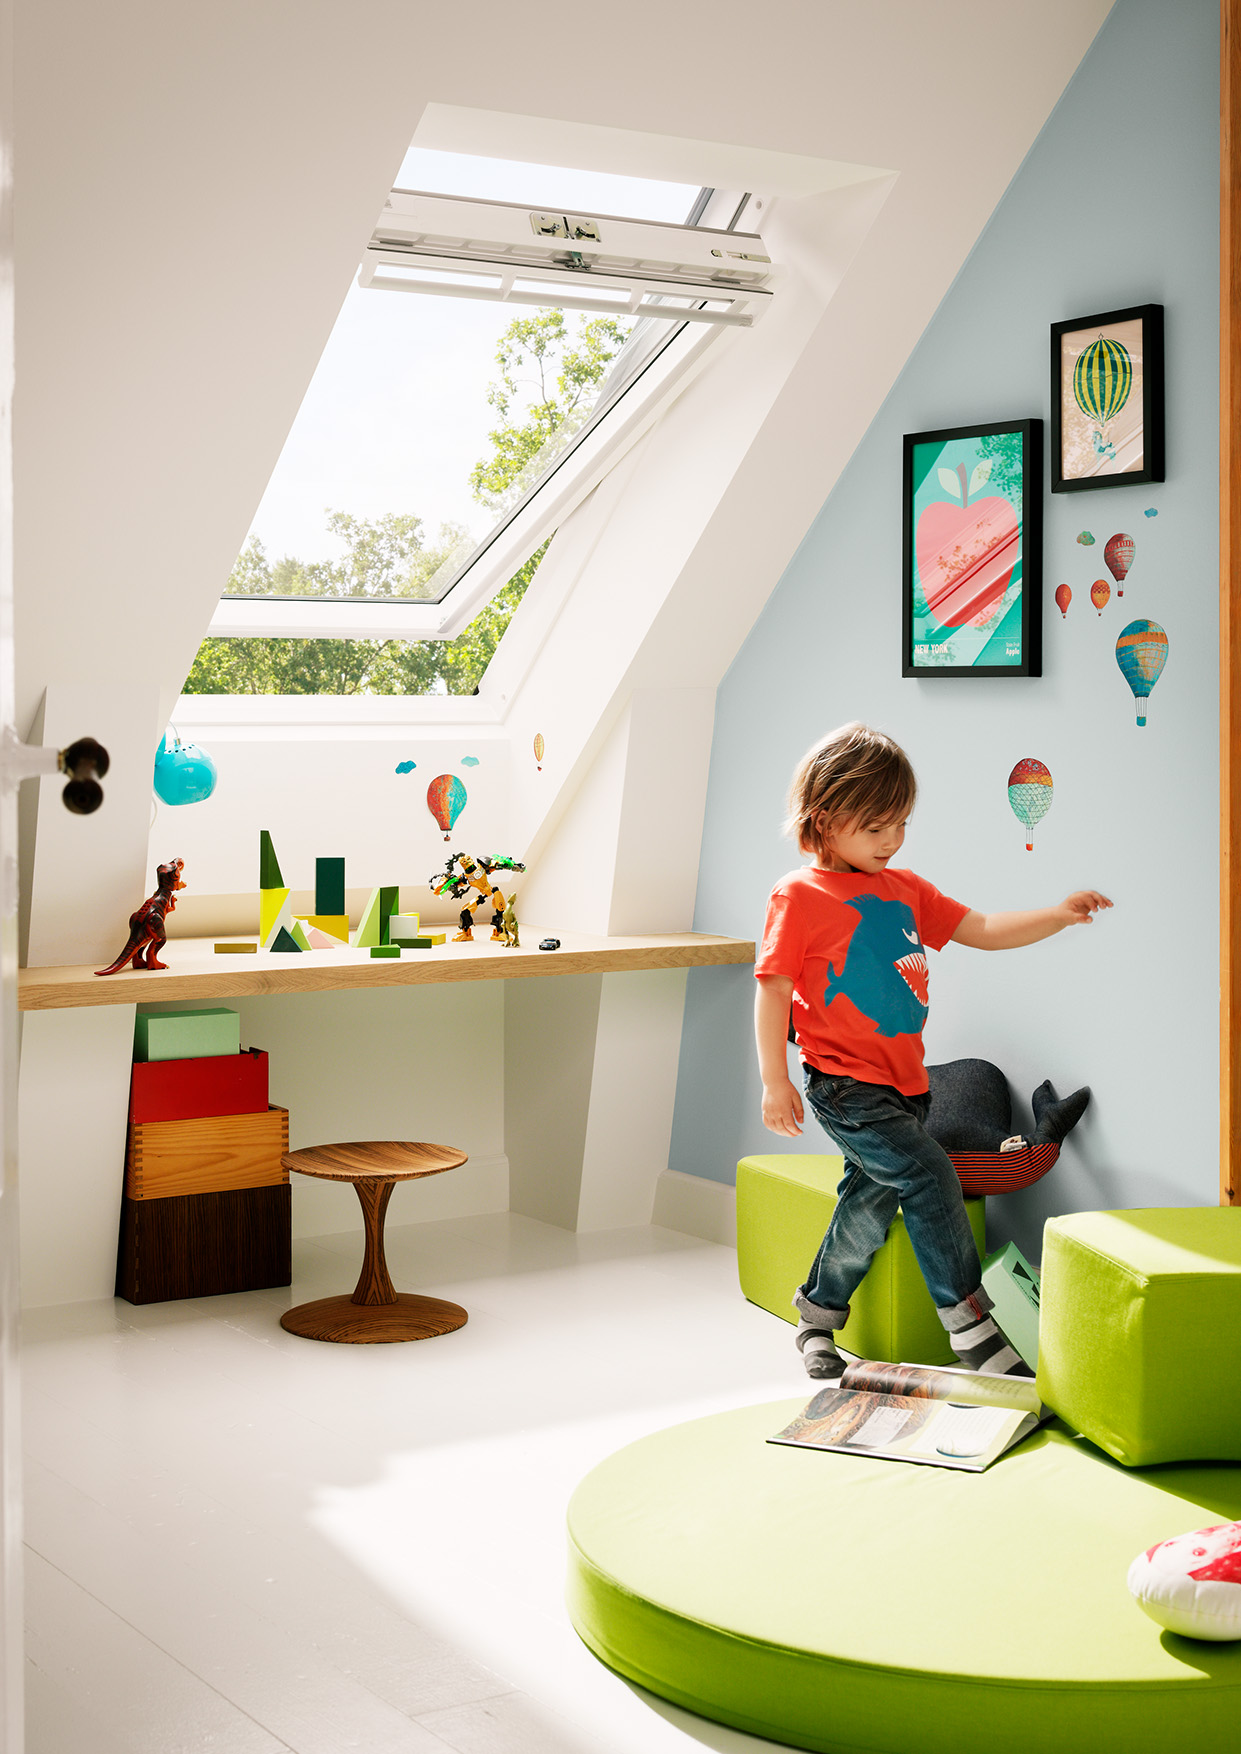 Child is playing in the bright and colourful kidsroom with roof window.